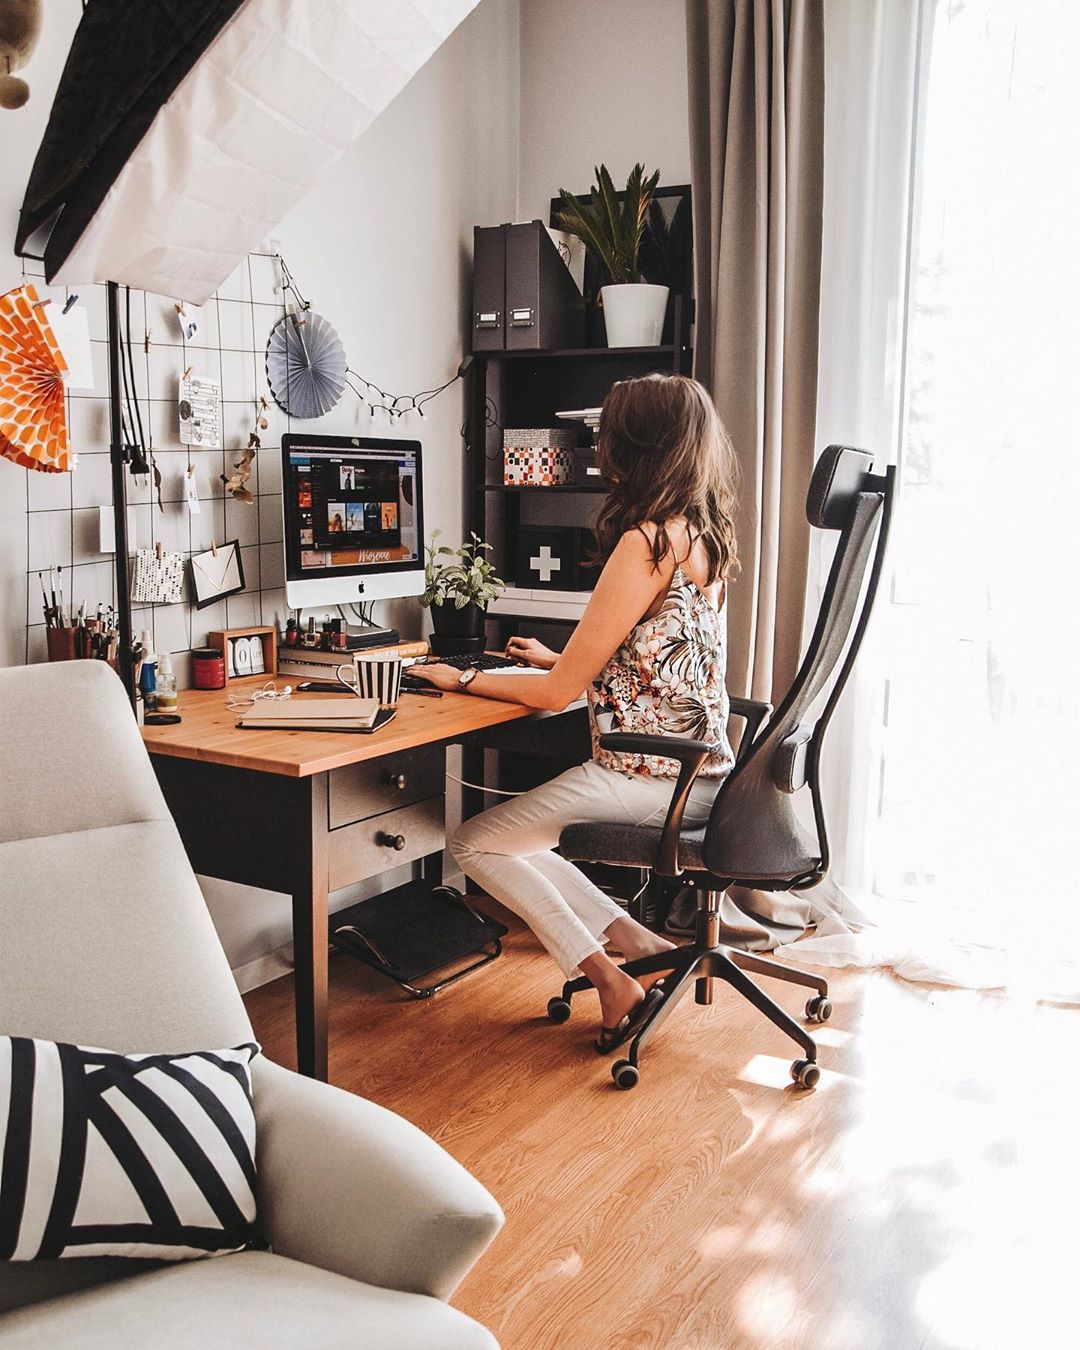 Woman working in home office space. Photo by Instagram user @onelittlesmile